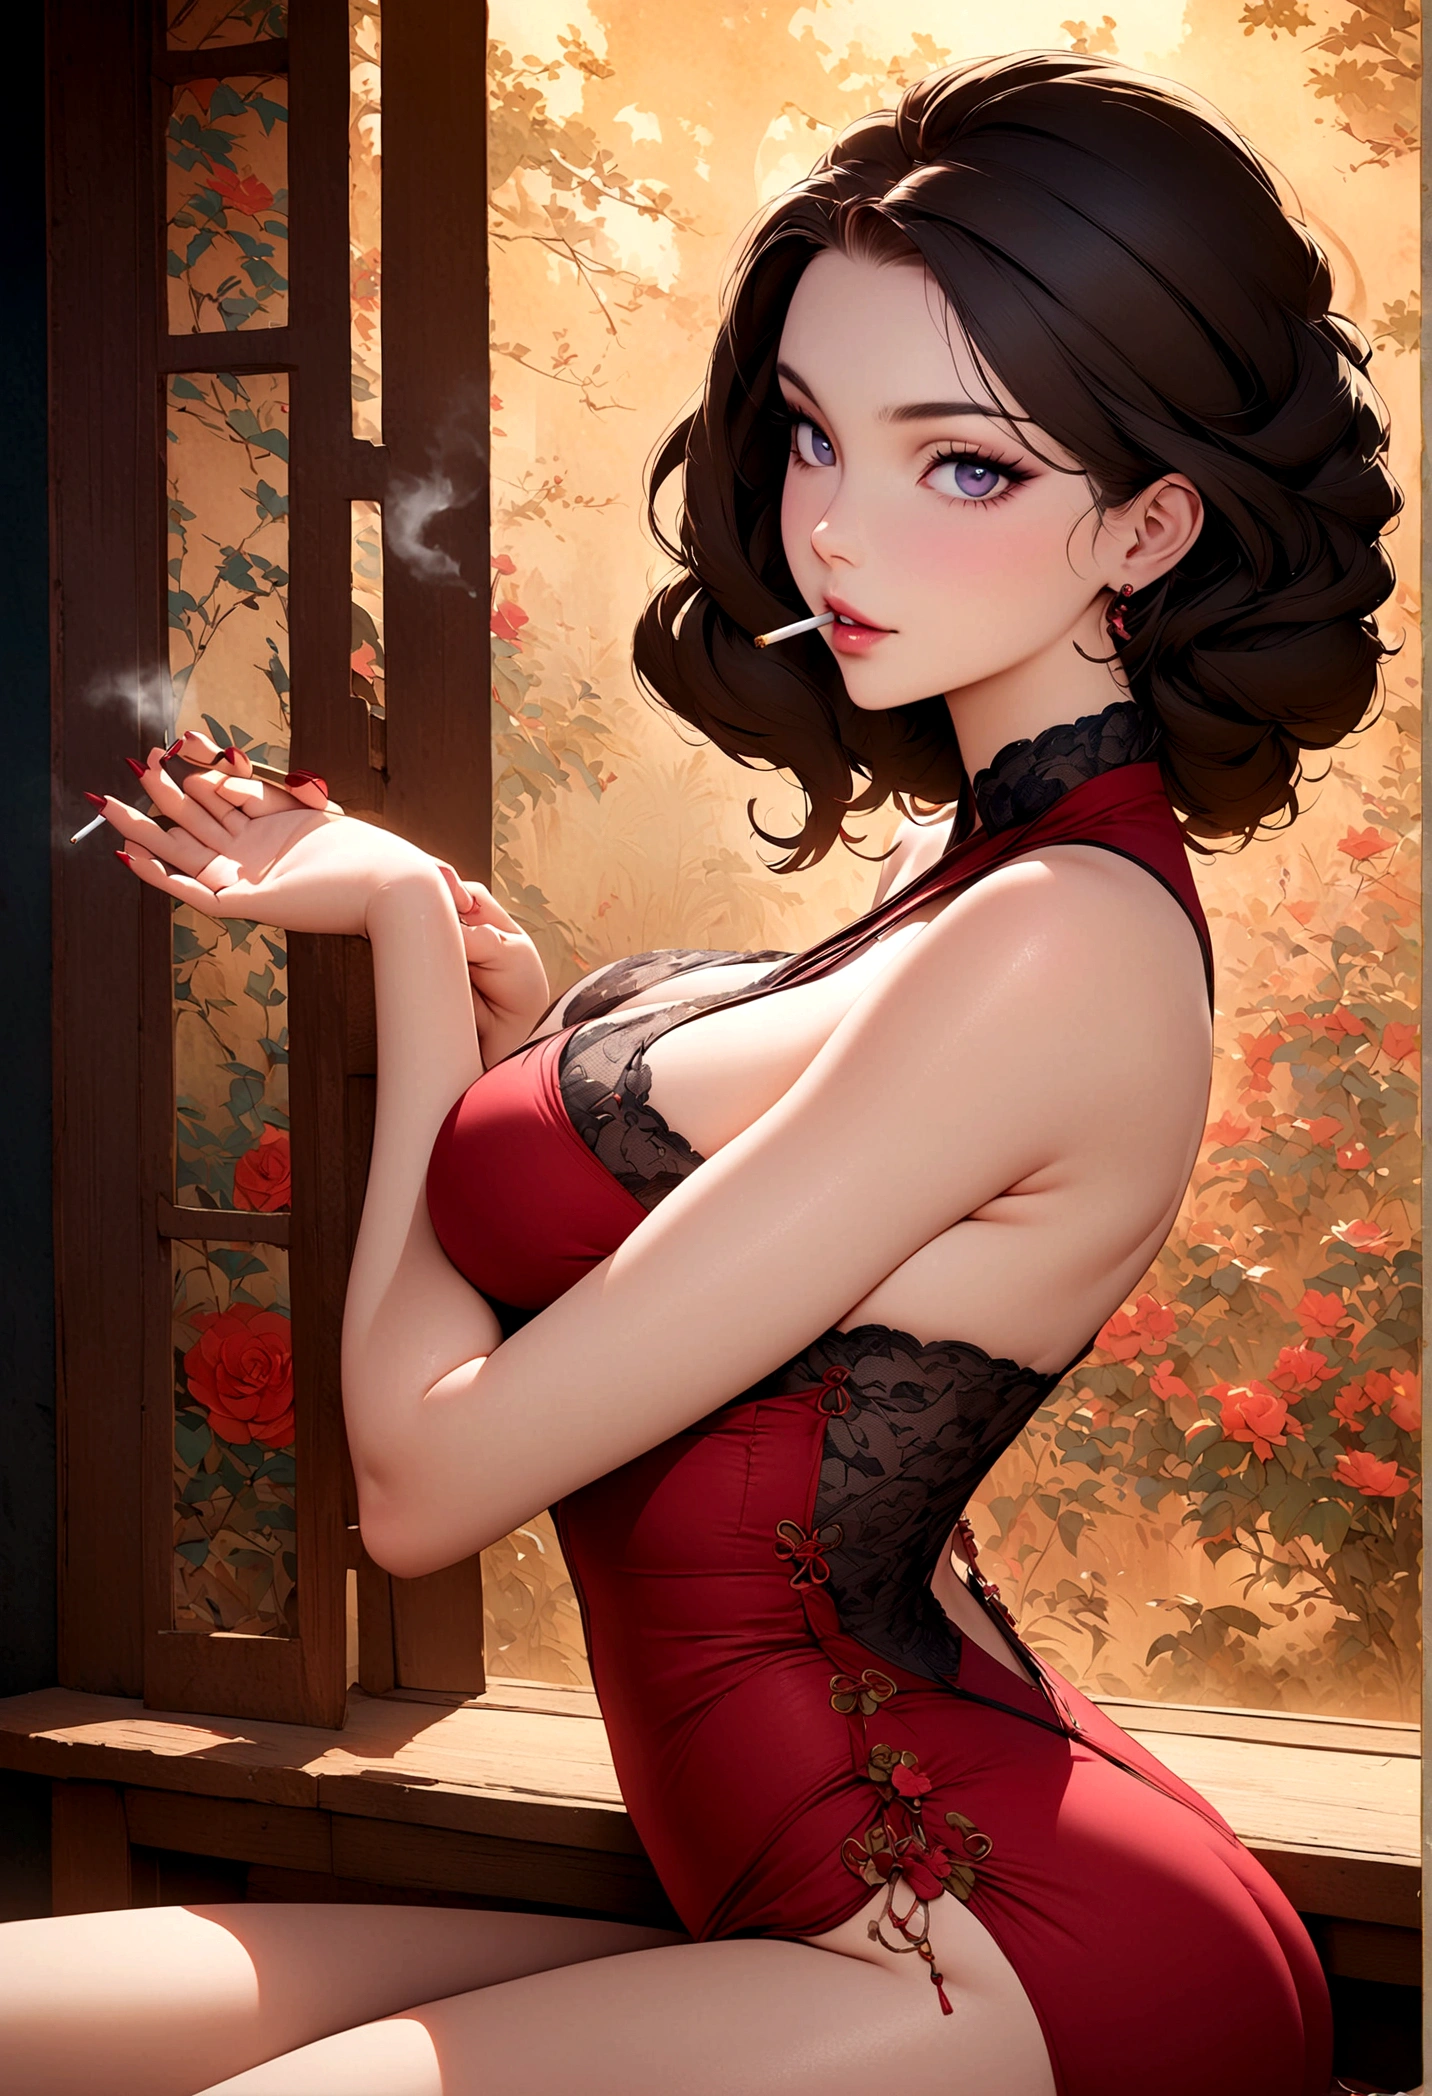 ((Masterpiece, top quality, high resolution)), ((highly detailed CG unified 8K wallpaper)), (huge stunning goddess shot, very hot and sexy, jaw-dropping beauty, perfect proportions, beautiful body, slim body beauty:1.1), Woman in Roses Lace Long Cheongsam Dress, there is a woman sitting on a chair with a cigarette in her hand, pinup art, girl pinup, 1920s geisha, pinup, oriental art nouveau, pin up girl, pin-up poster girl, pinup pose, inspired by Alberto Vargas, pinup girl, retro pinup model, pin - up girl, vintage pin up,